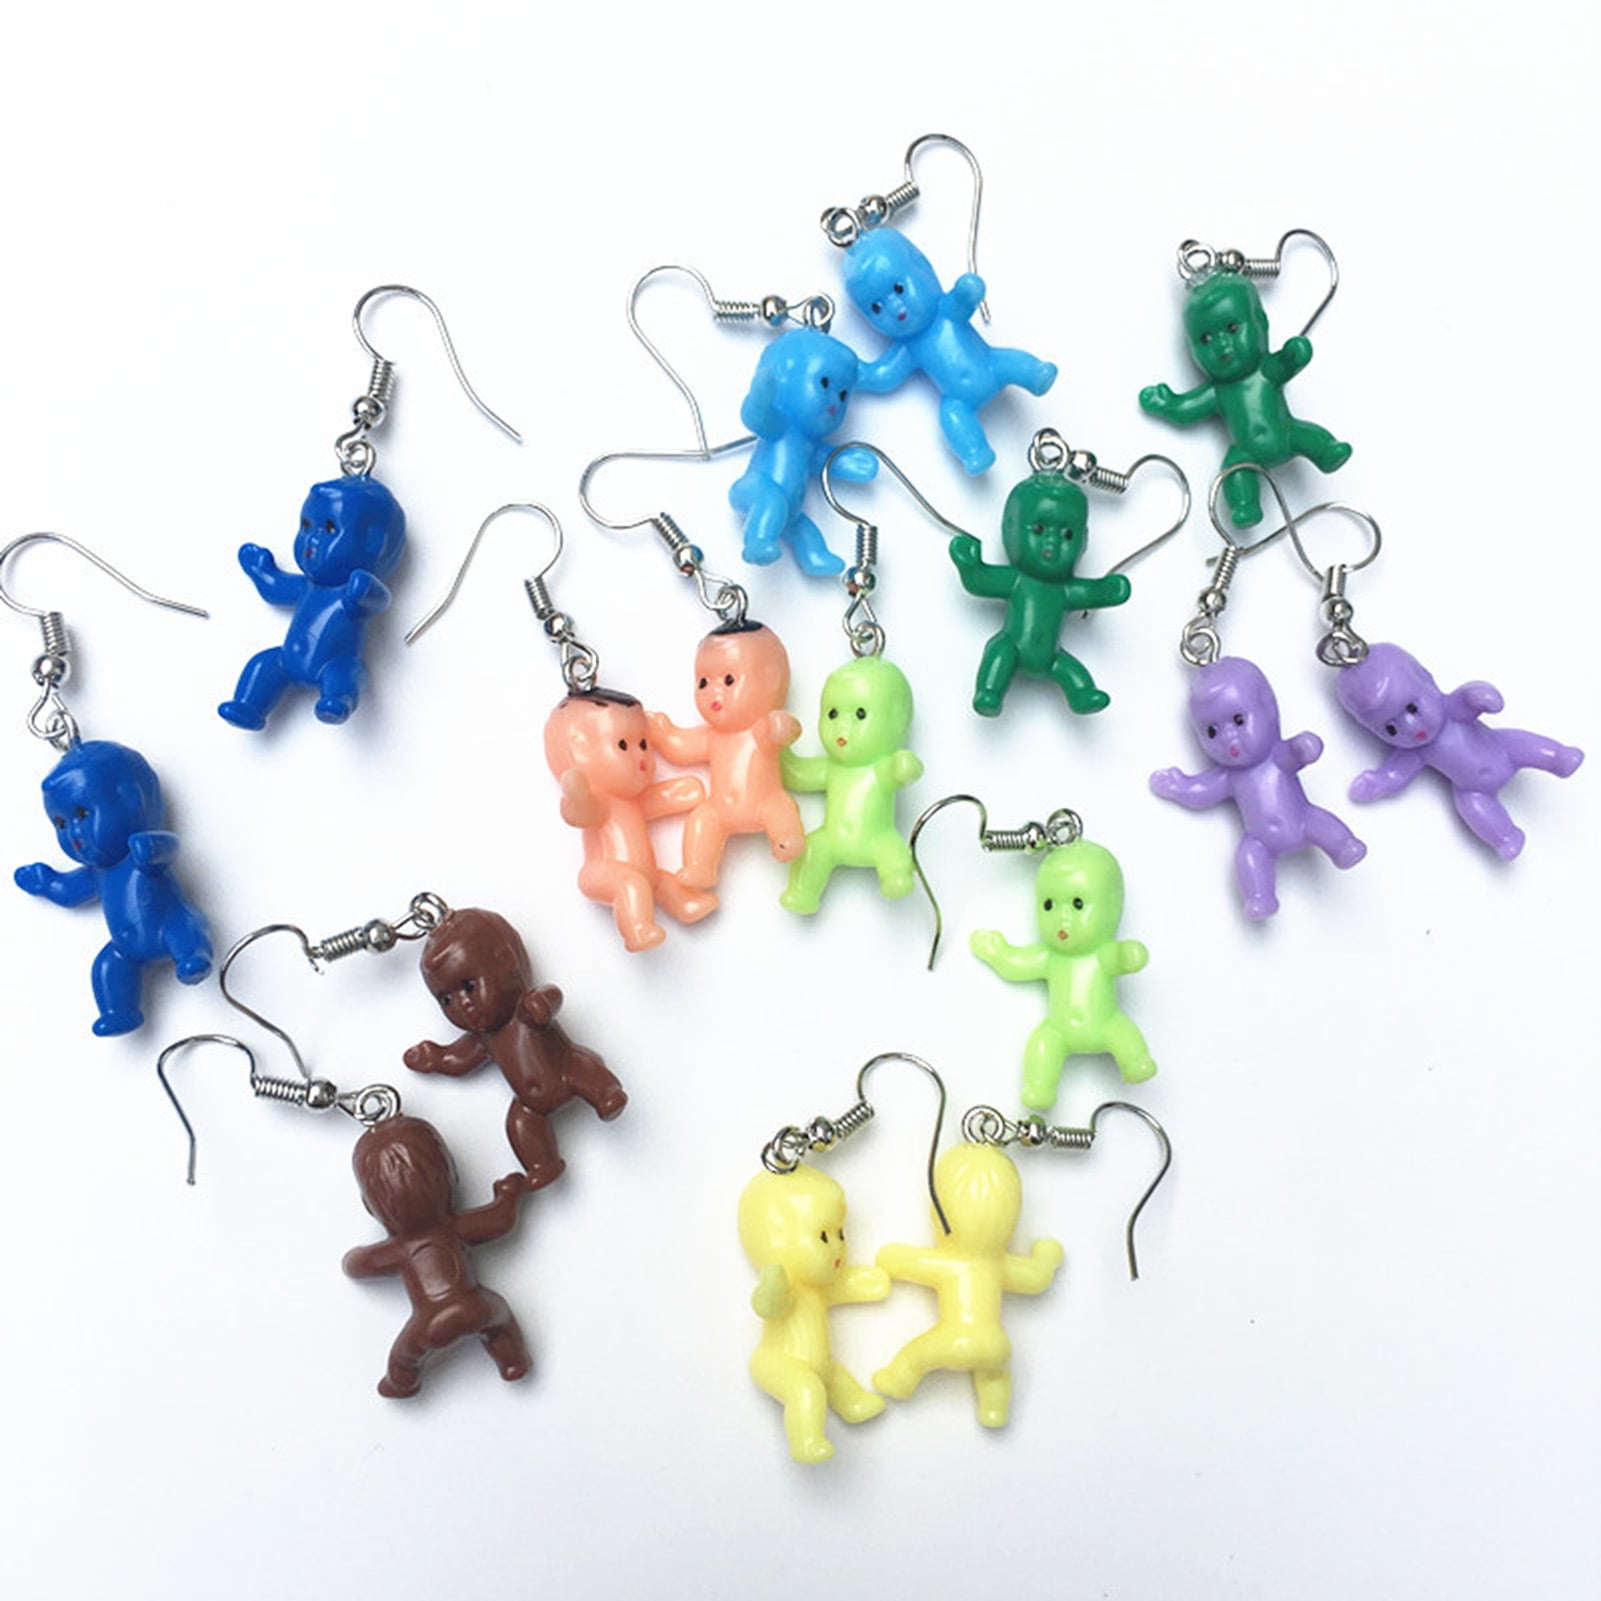 6 Pairs of Mini Plastic Baby Earrings Accessories Mixed Race 1-Inch Baby Doll Hook Hook Earrings,Funny Earrings, Suitable for Baby Shower Party